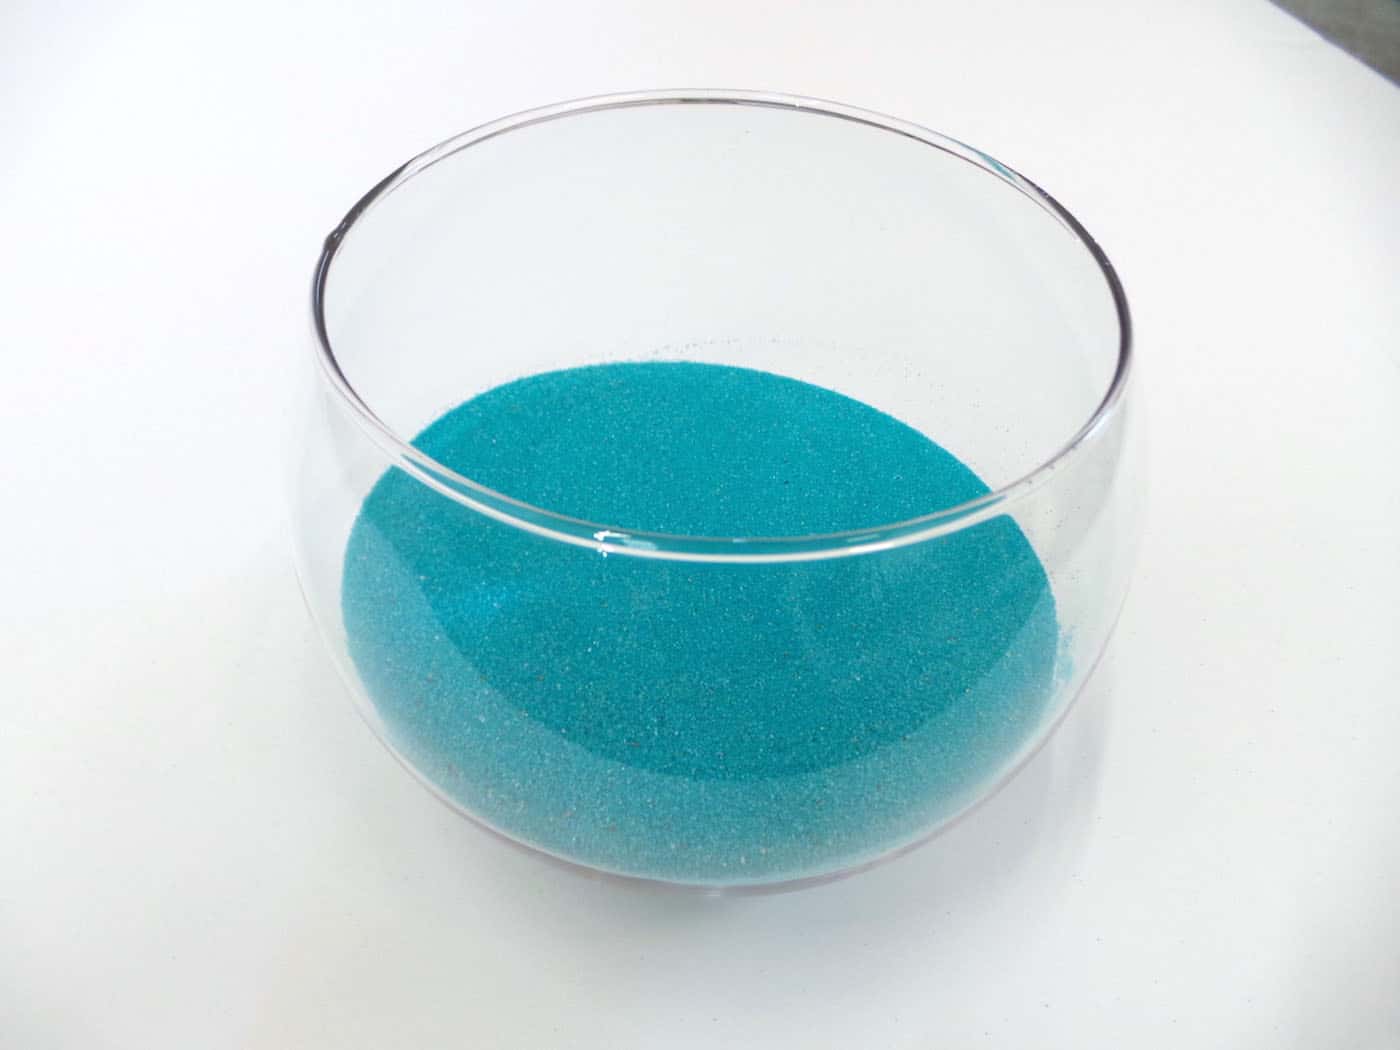 Craft sand in a clear glass bubble bowl